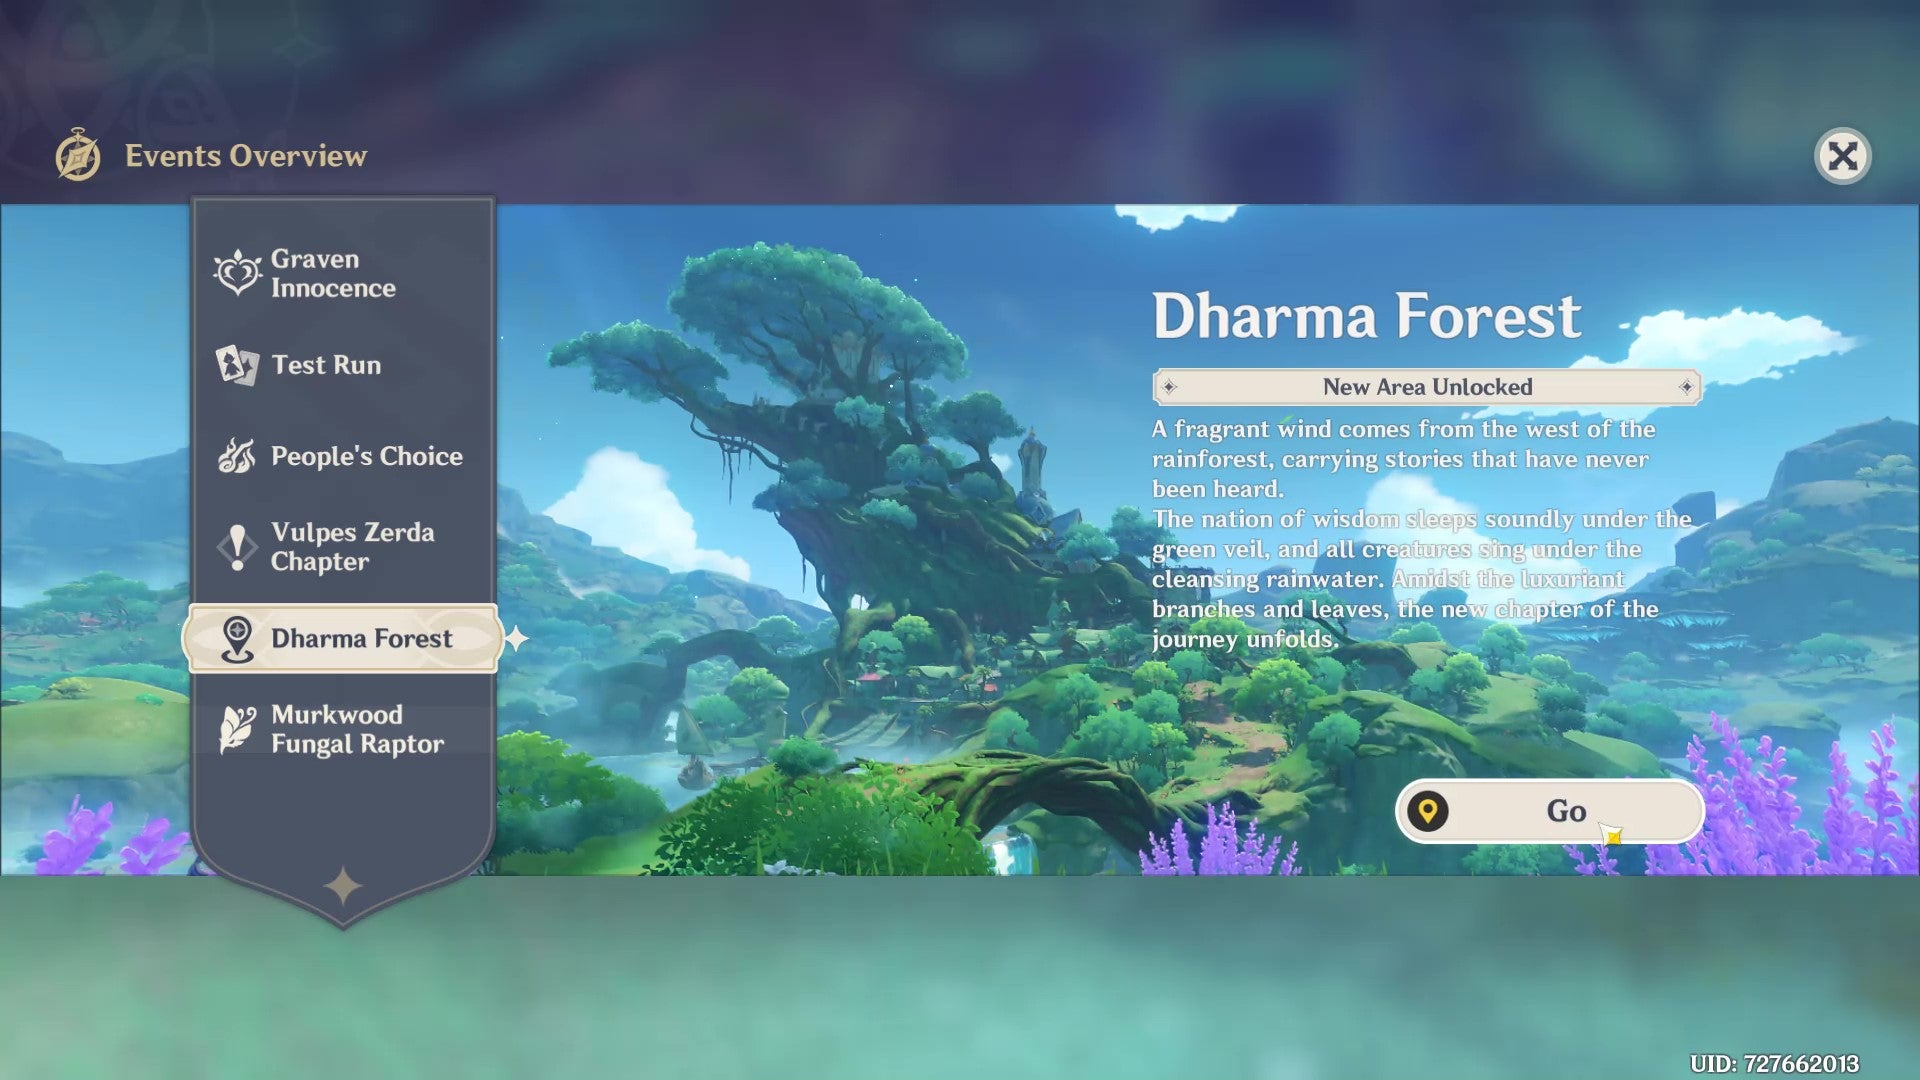 The event overview for "Dharma Forest" in Genshin Impact V3.0.